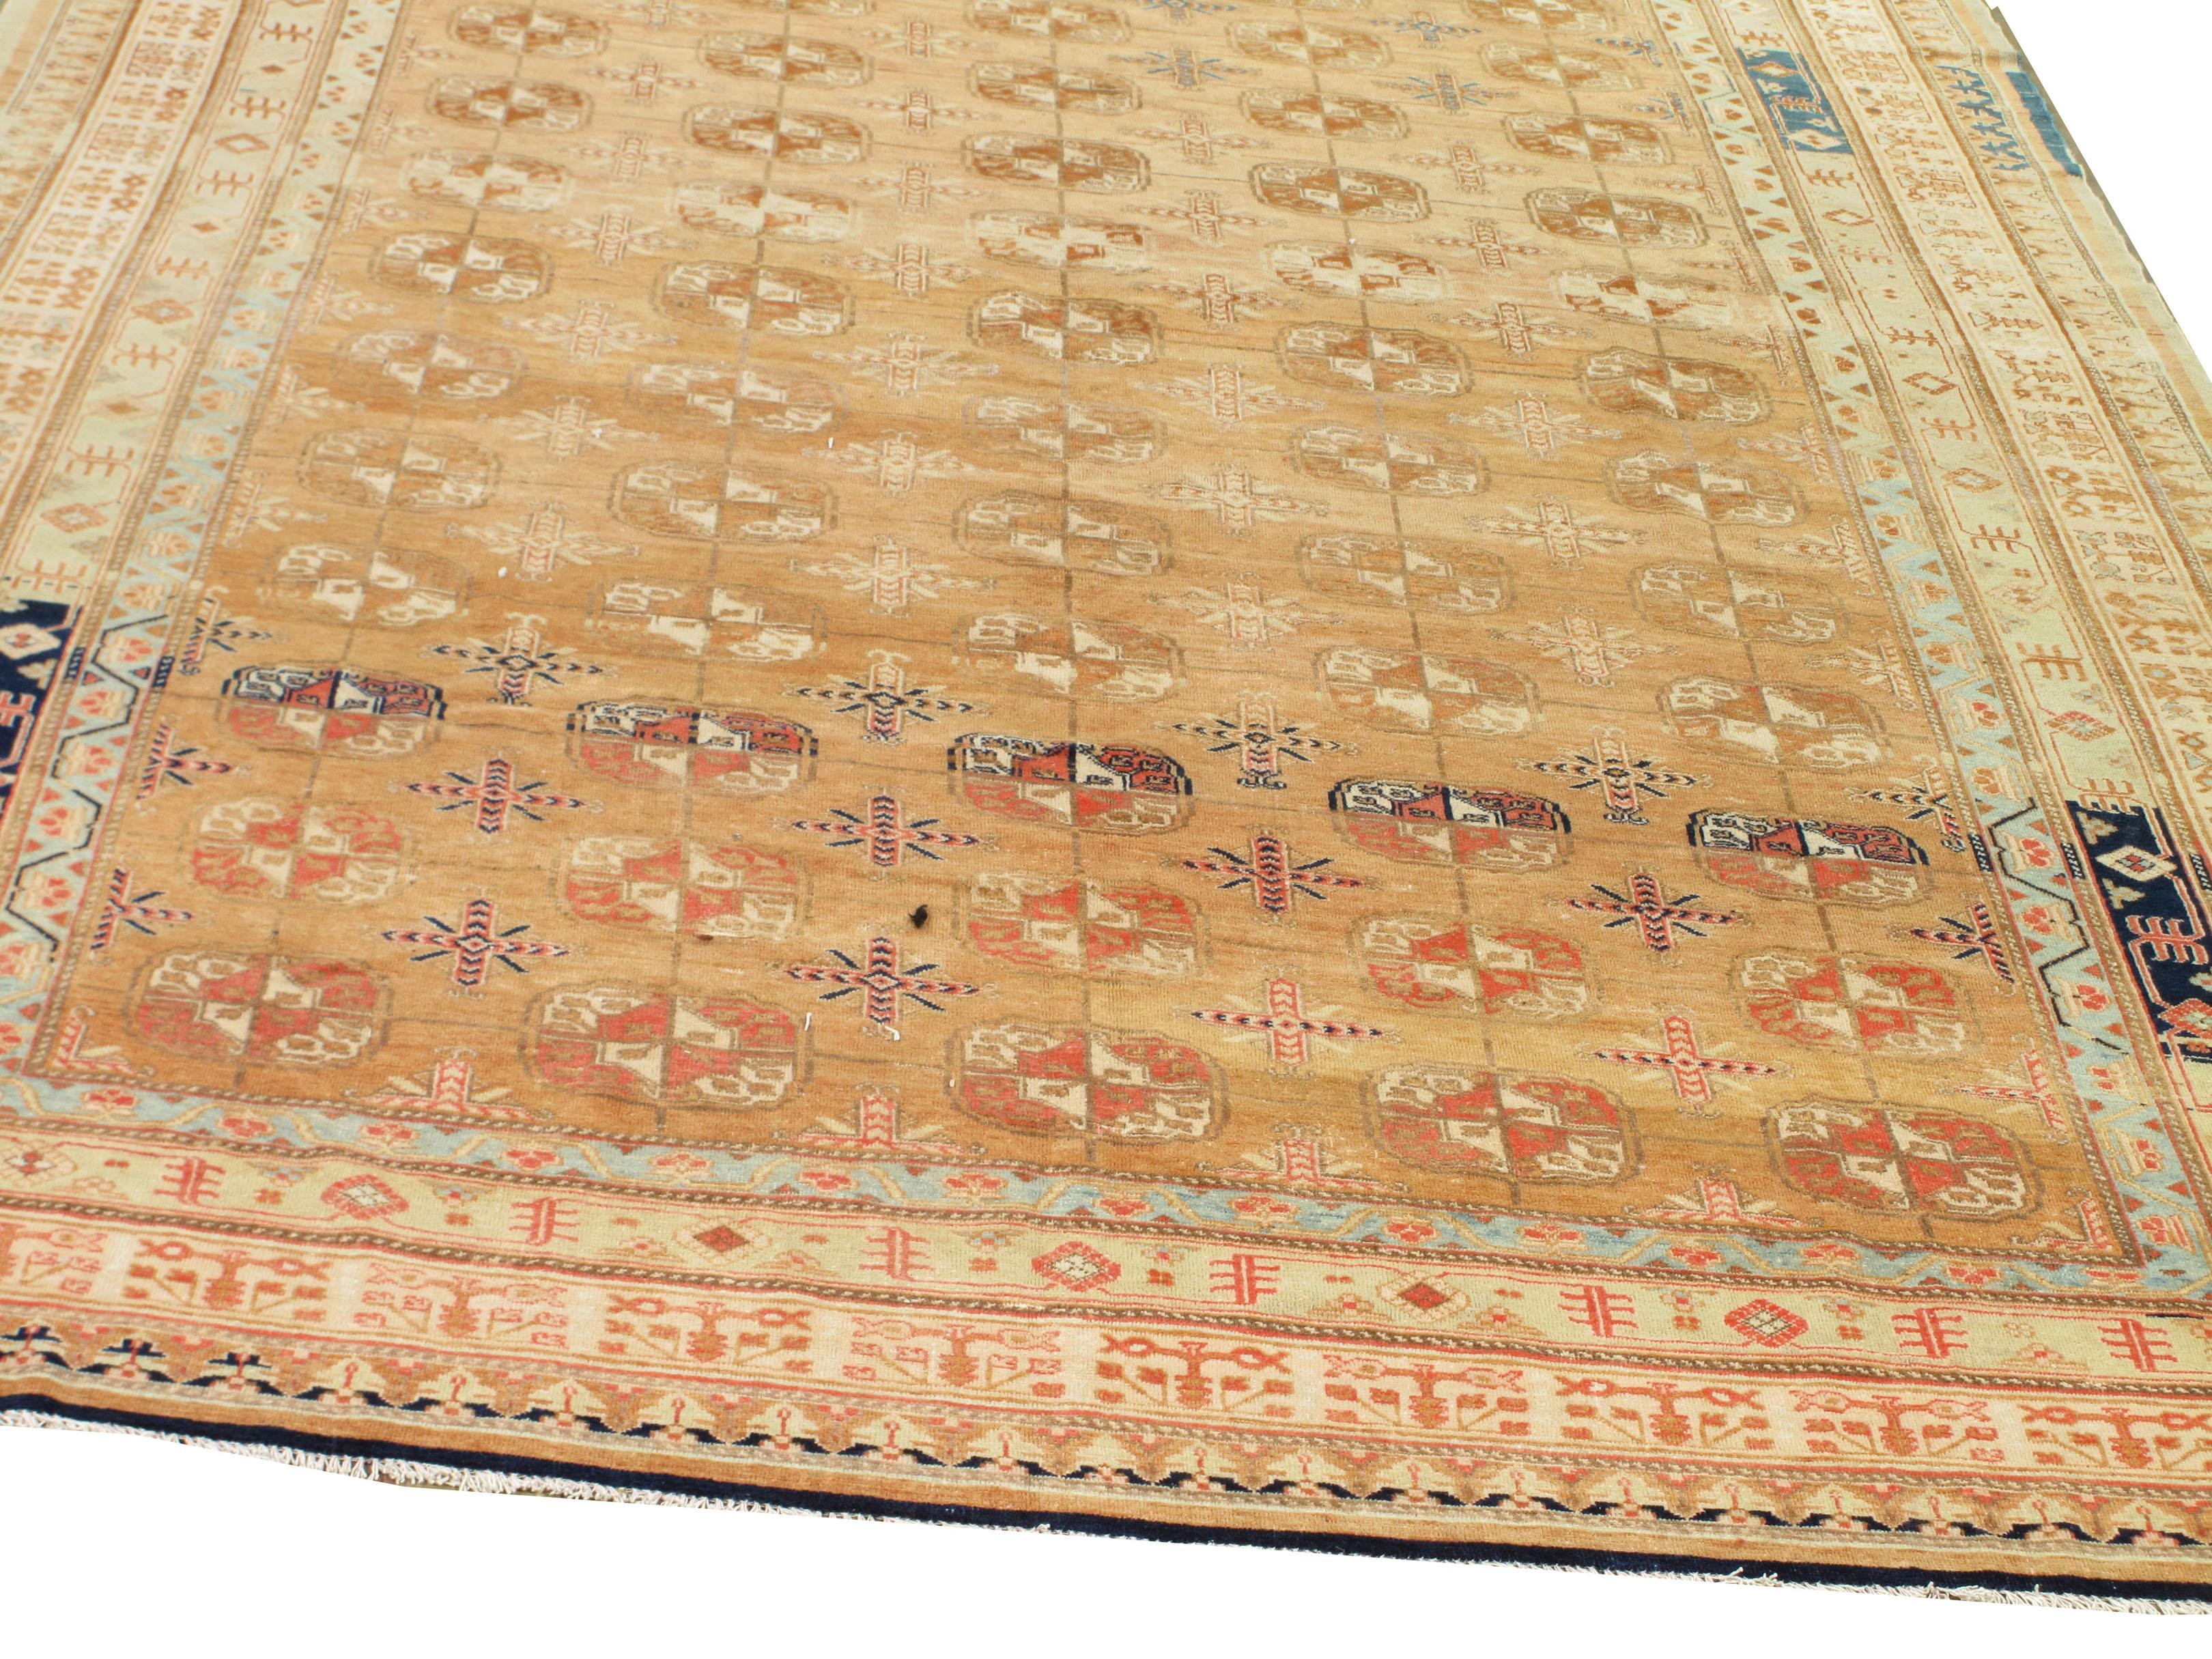 Antique Khotan/Samarkand from Uzbekistan, Samarkand was once the gateway to China, circa 1900. This rug has an Abrash which is a natural change in color that occurs when different dyes are used in a batch of wool and gives uniqueness an extra beauty